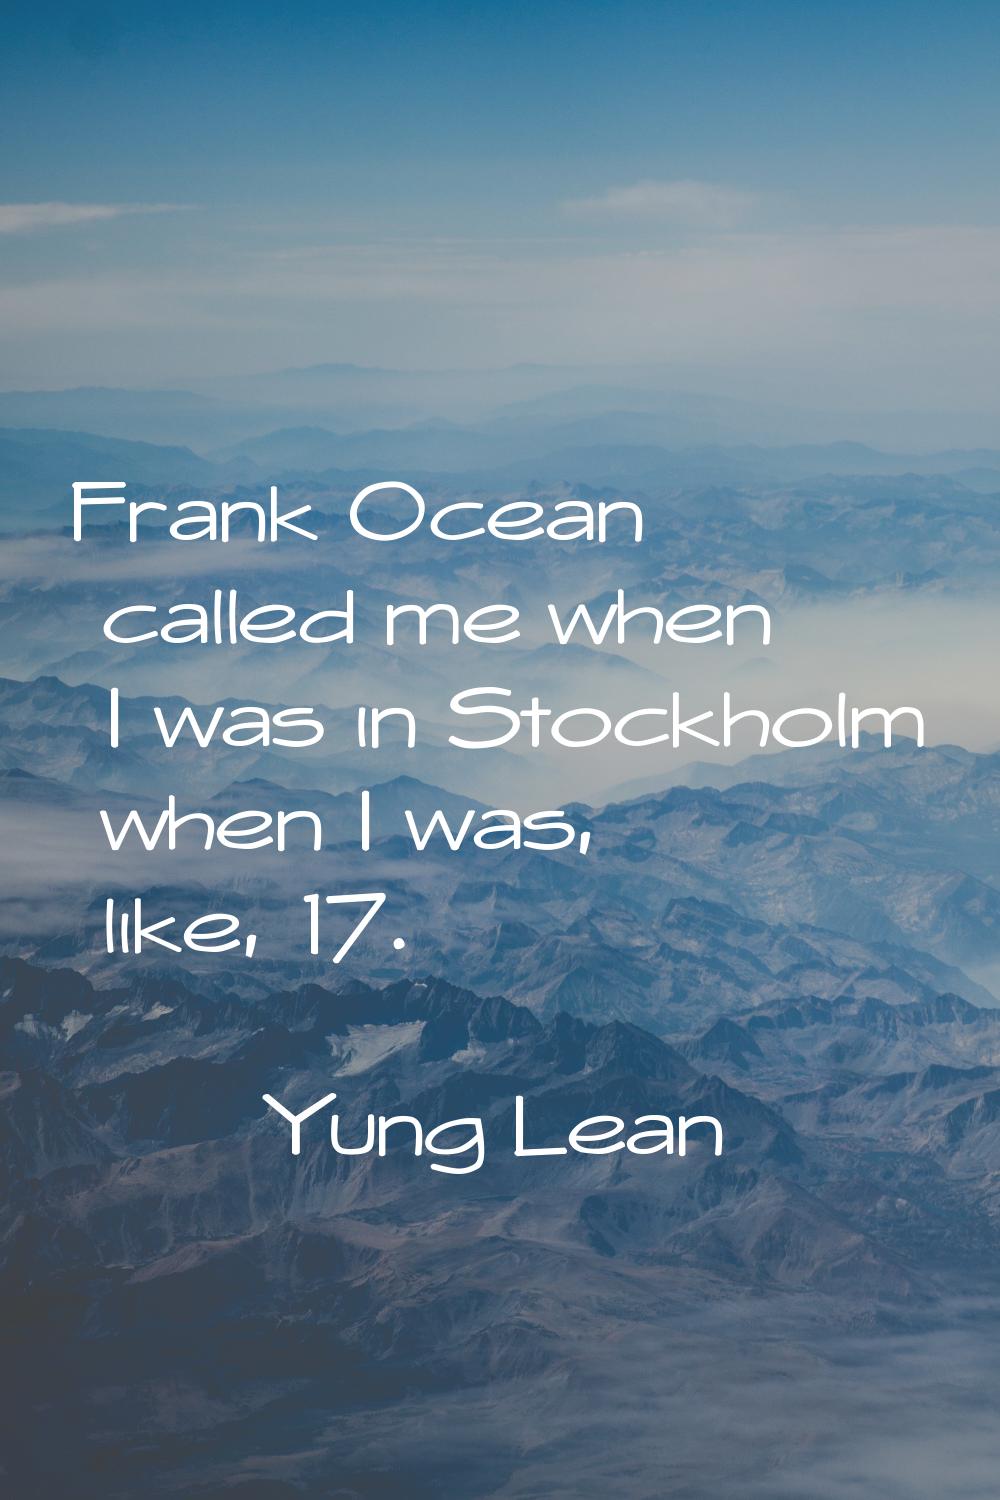 Frank Ocean called me when I was in Stockholm when I was, like, 17.